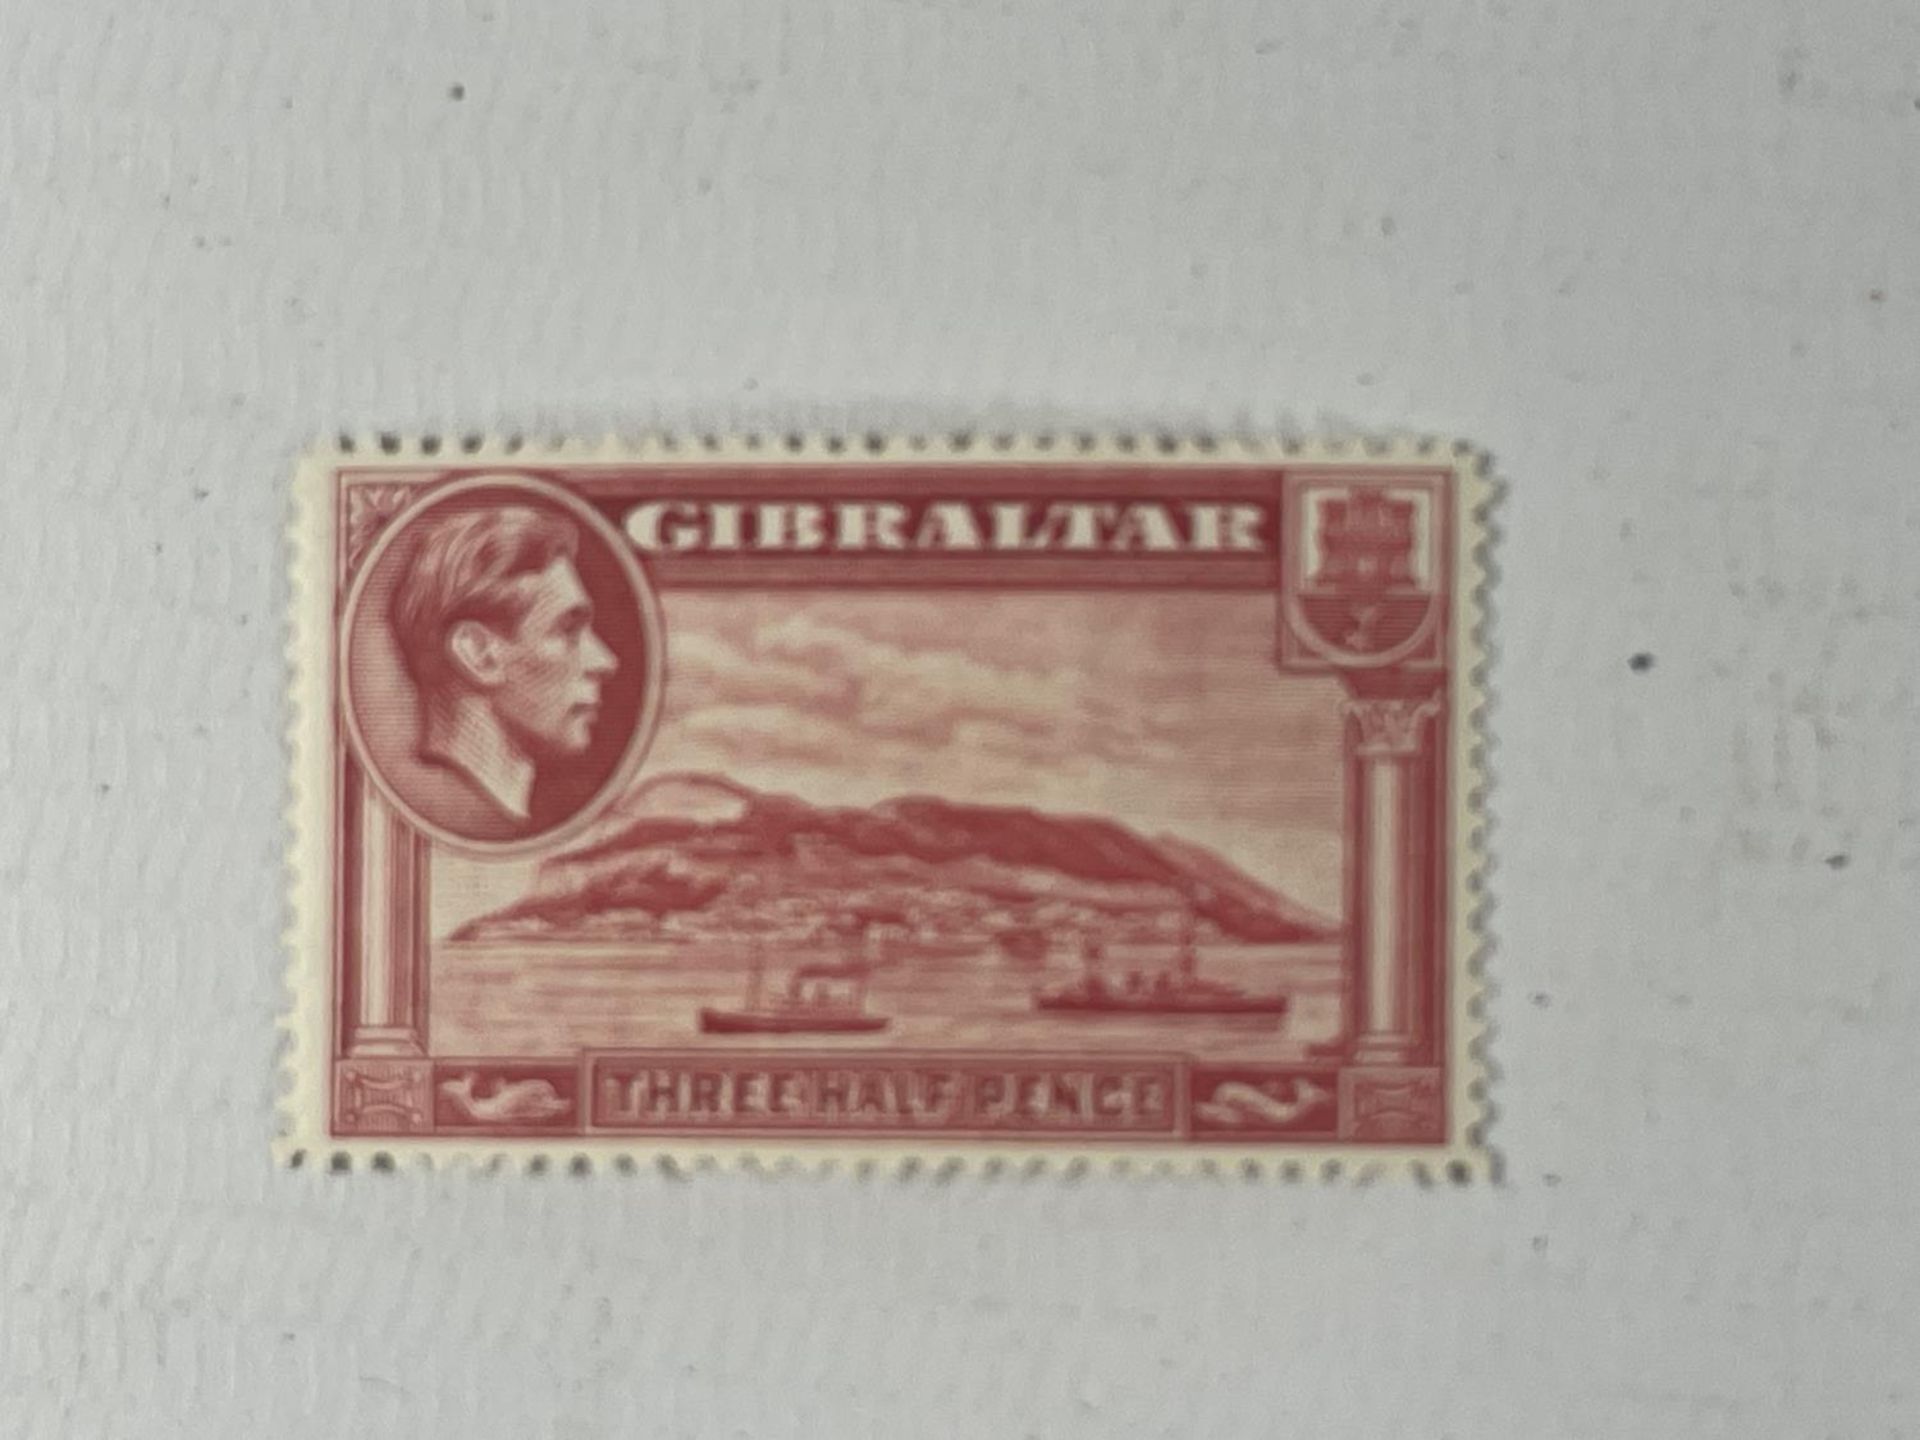 GIBRALTAR 1938/51 11/2D CARMINE , P14 , X 15 UNMOUNTED MINT EXAMPLES . SG 123 CAT £35 X 15 = £525.00 - Image 2 of 2